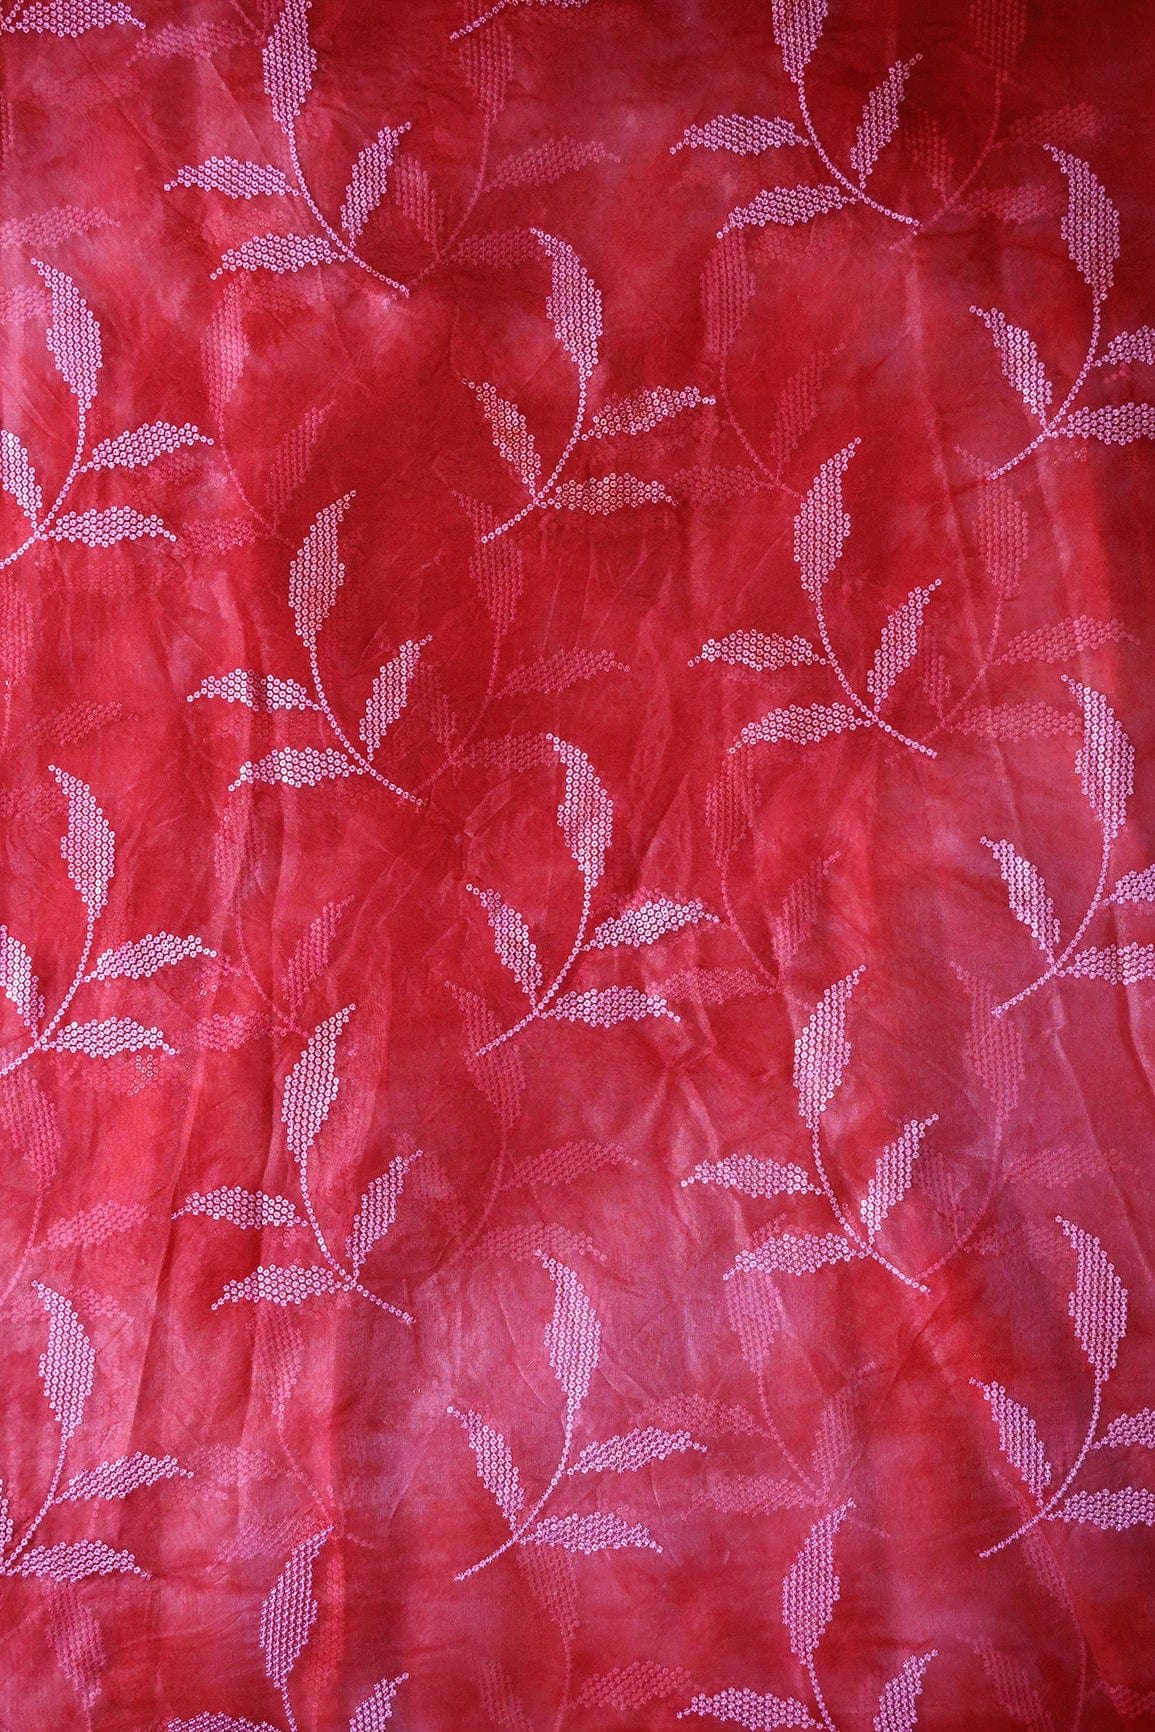 doeraa Embroidery Fabrics 2.25 Meter Cut Piece Of Silver Sequins Leafy Embroidery Work On Tie & Dye Red Organza Fabric